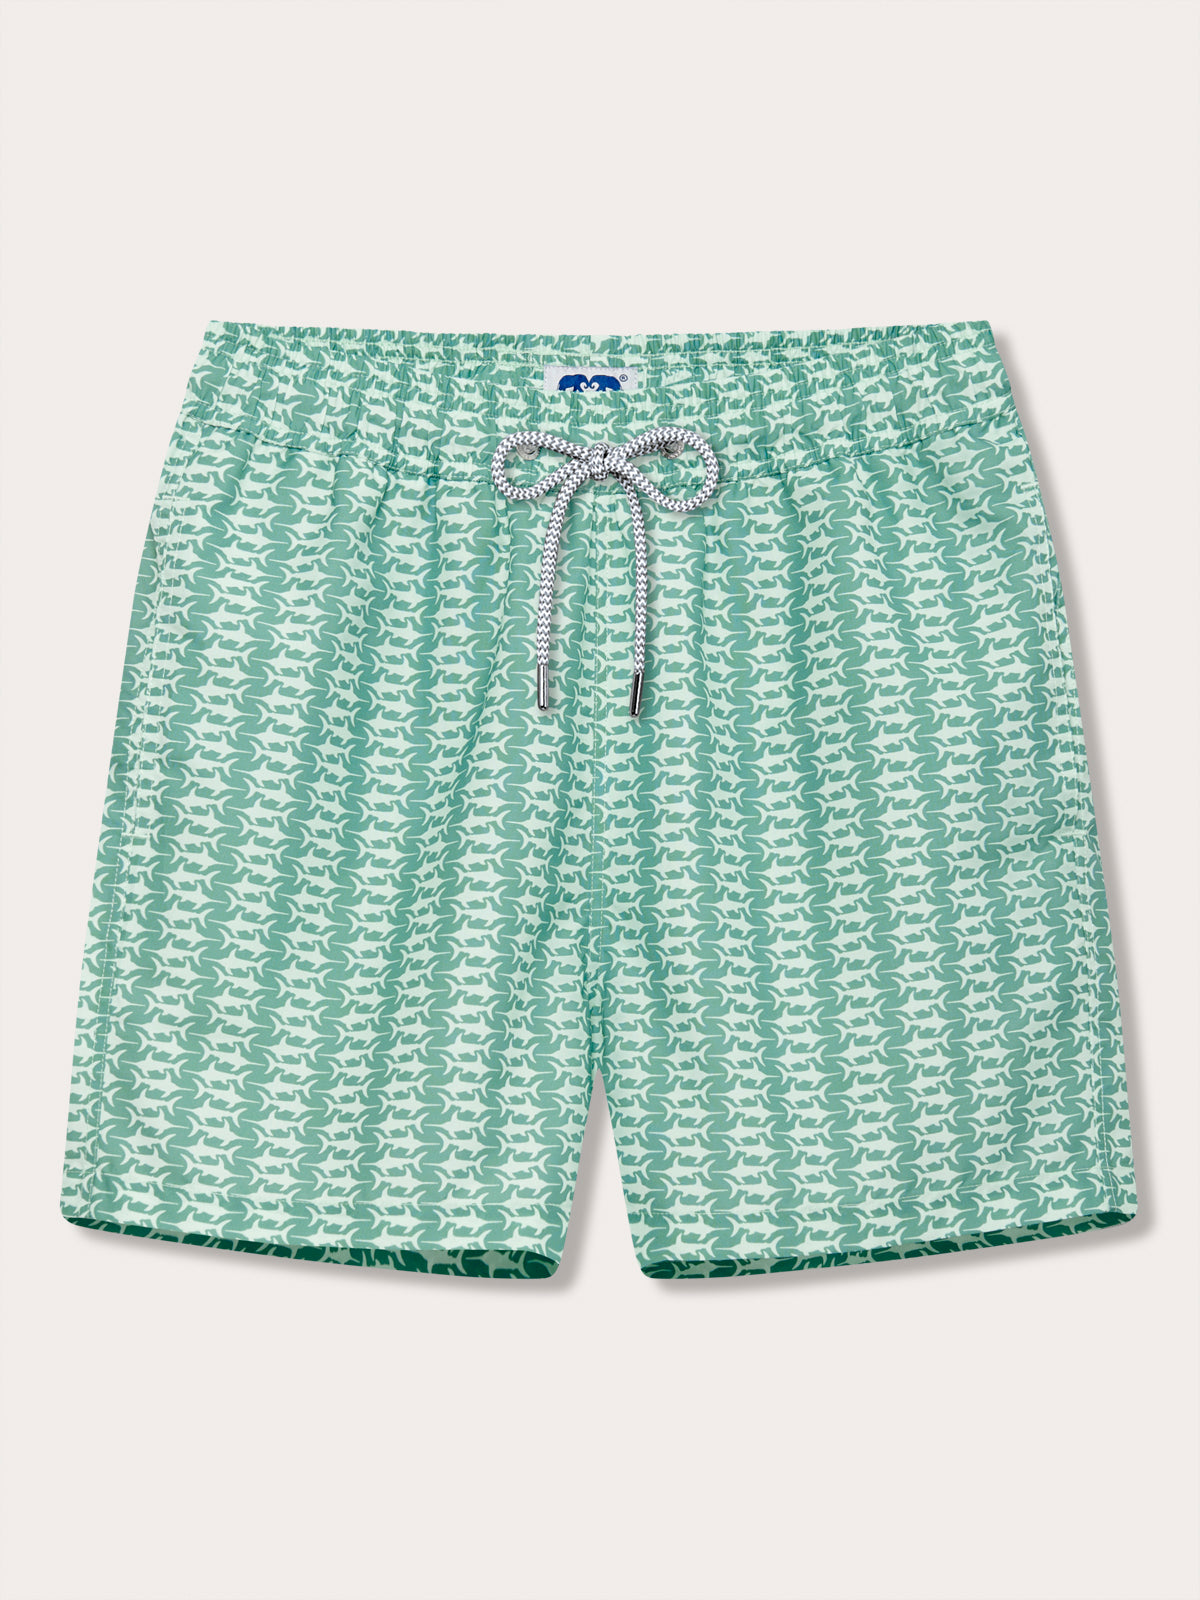 Men's Which Way to the Tropics Staniel Swim Shorts in green with swordfish print, featuring a grey and white drawstring for adjustable fit.